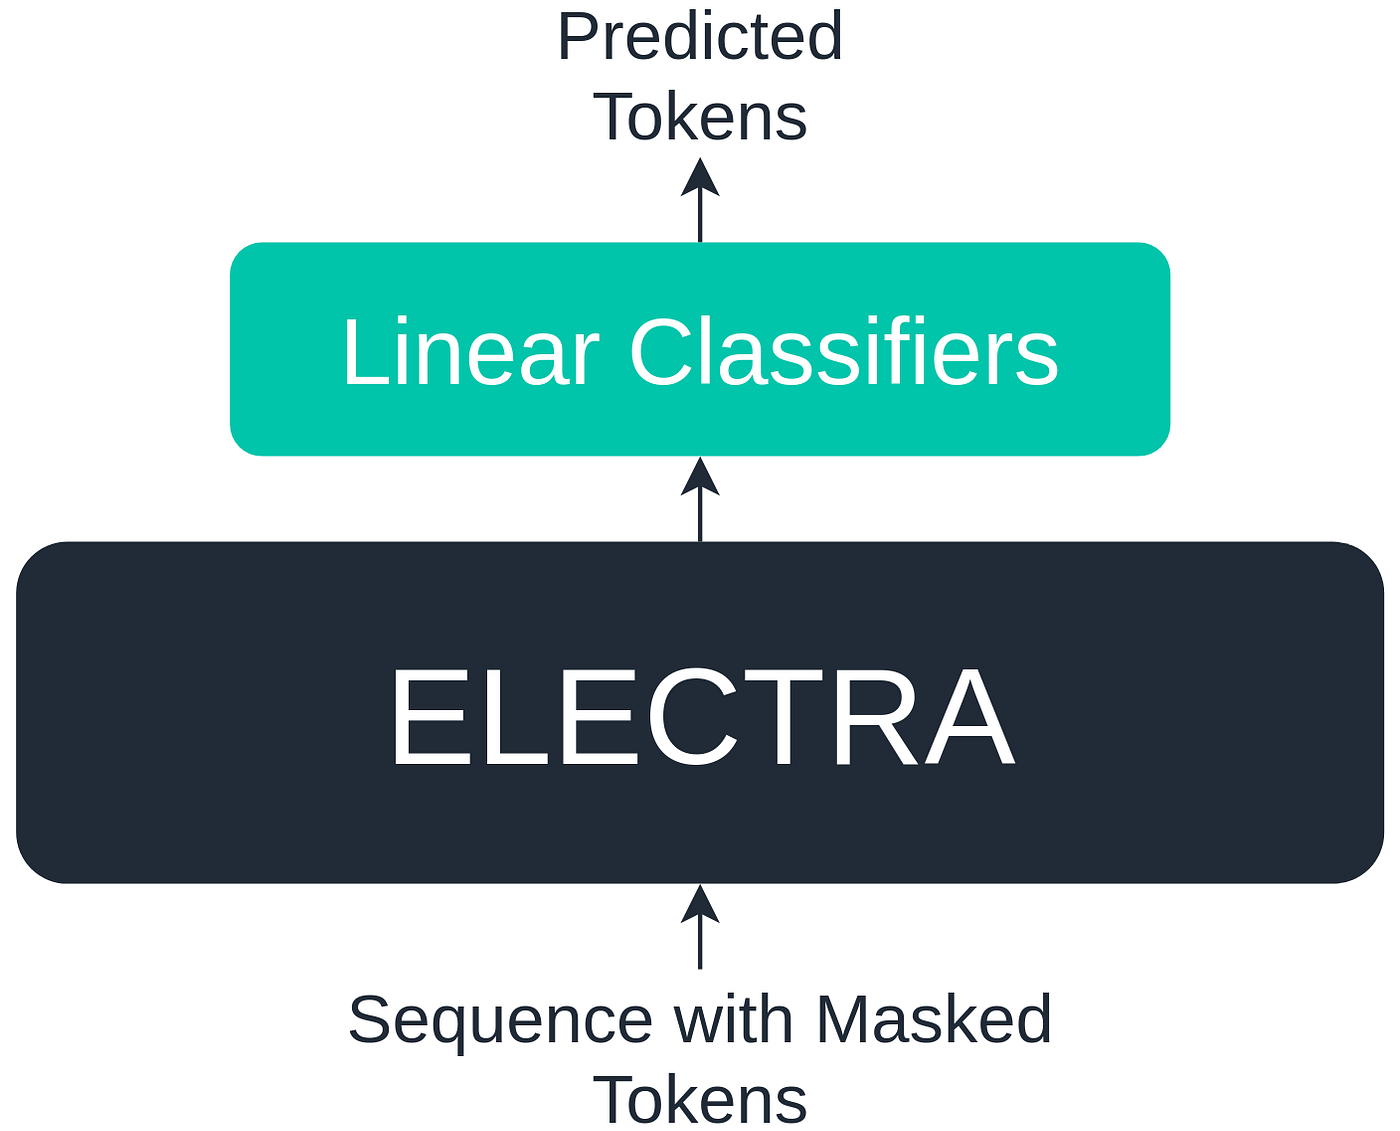 Most Powerful NLP Transformer - ELECTRA | Towards Data Science